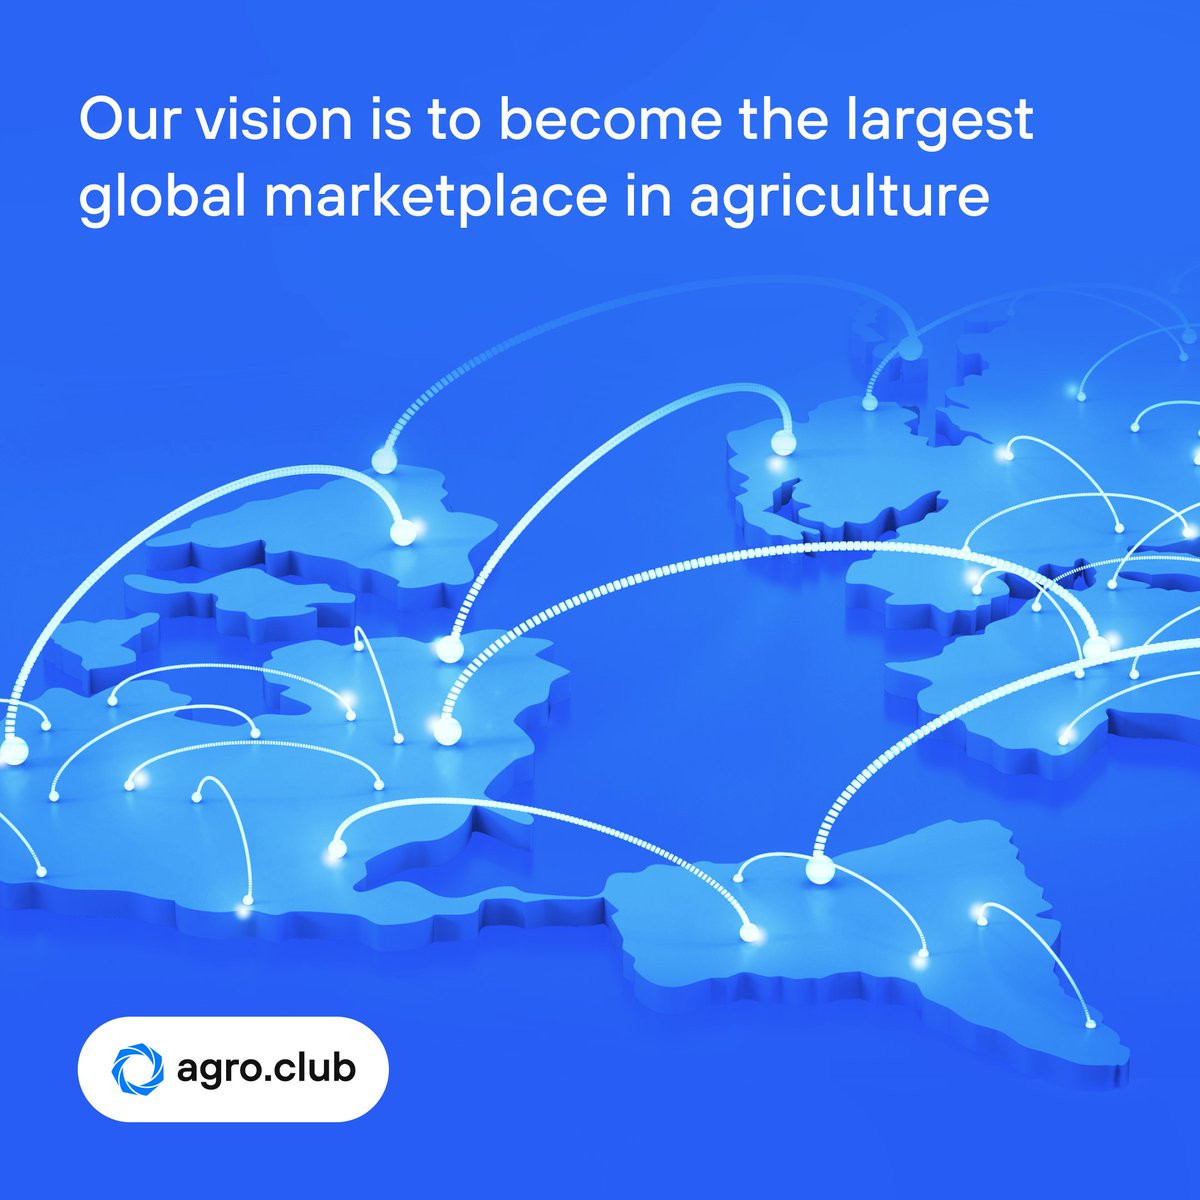 It may sound ambitious, but from day one, we've been loyal to the vision of building a holistic ecosystem for the full agricultural value chain—the largest global marketplace.
Come & join us along the way!
As a partner, a team member, a peer, or a follower. 
#agtech
#graintrade